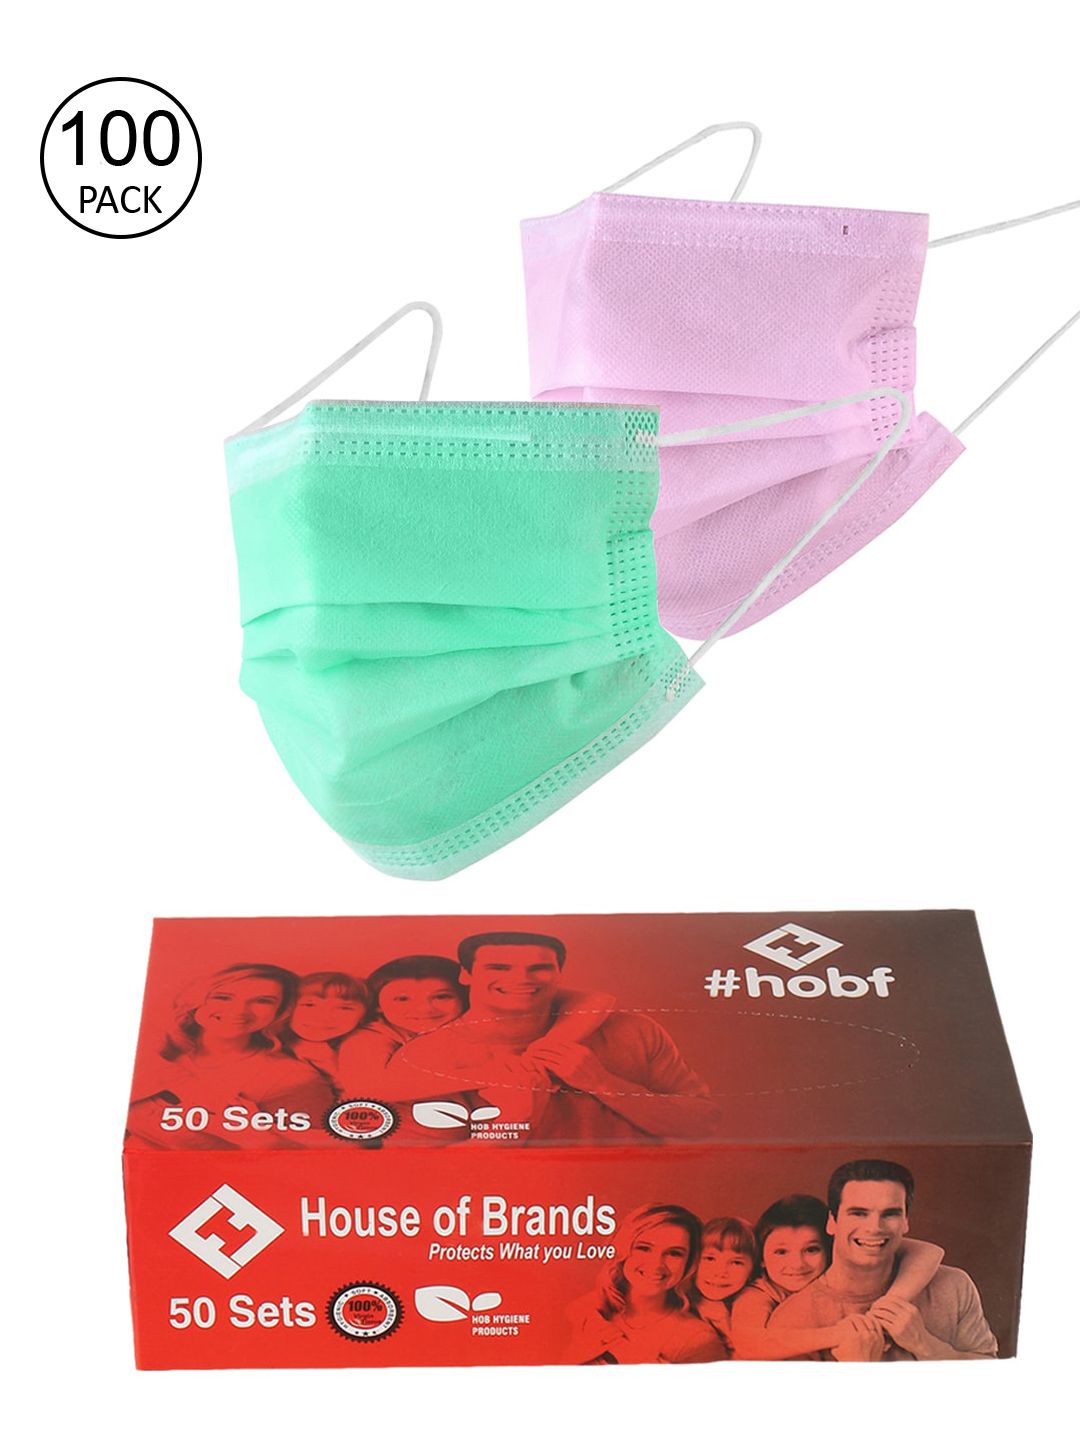 LONDON FASHION hob Unisex Pack of 100 3-Ply Anti-Pollution Disposable Ultrasonic Surgical Masks Price in India